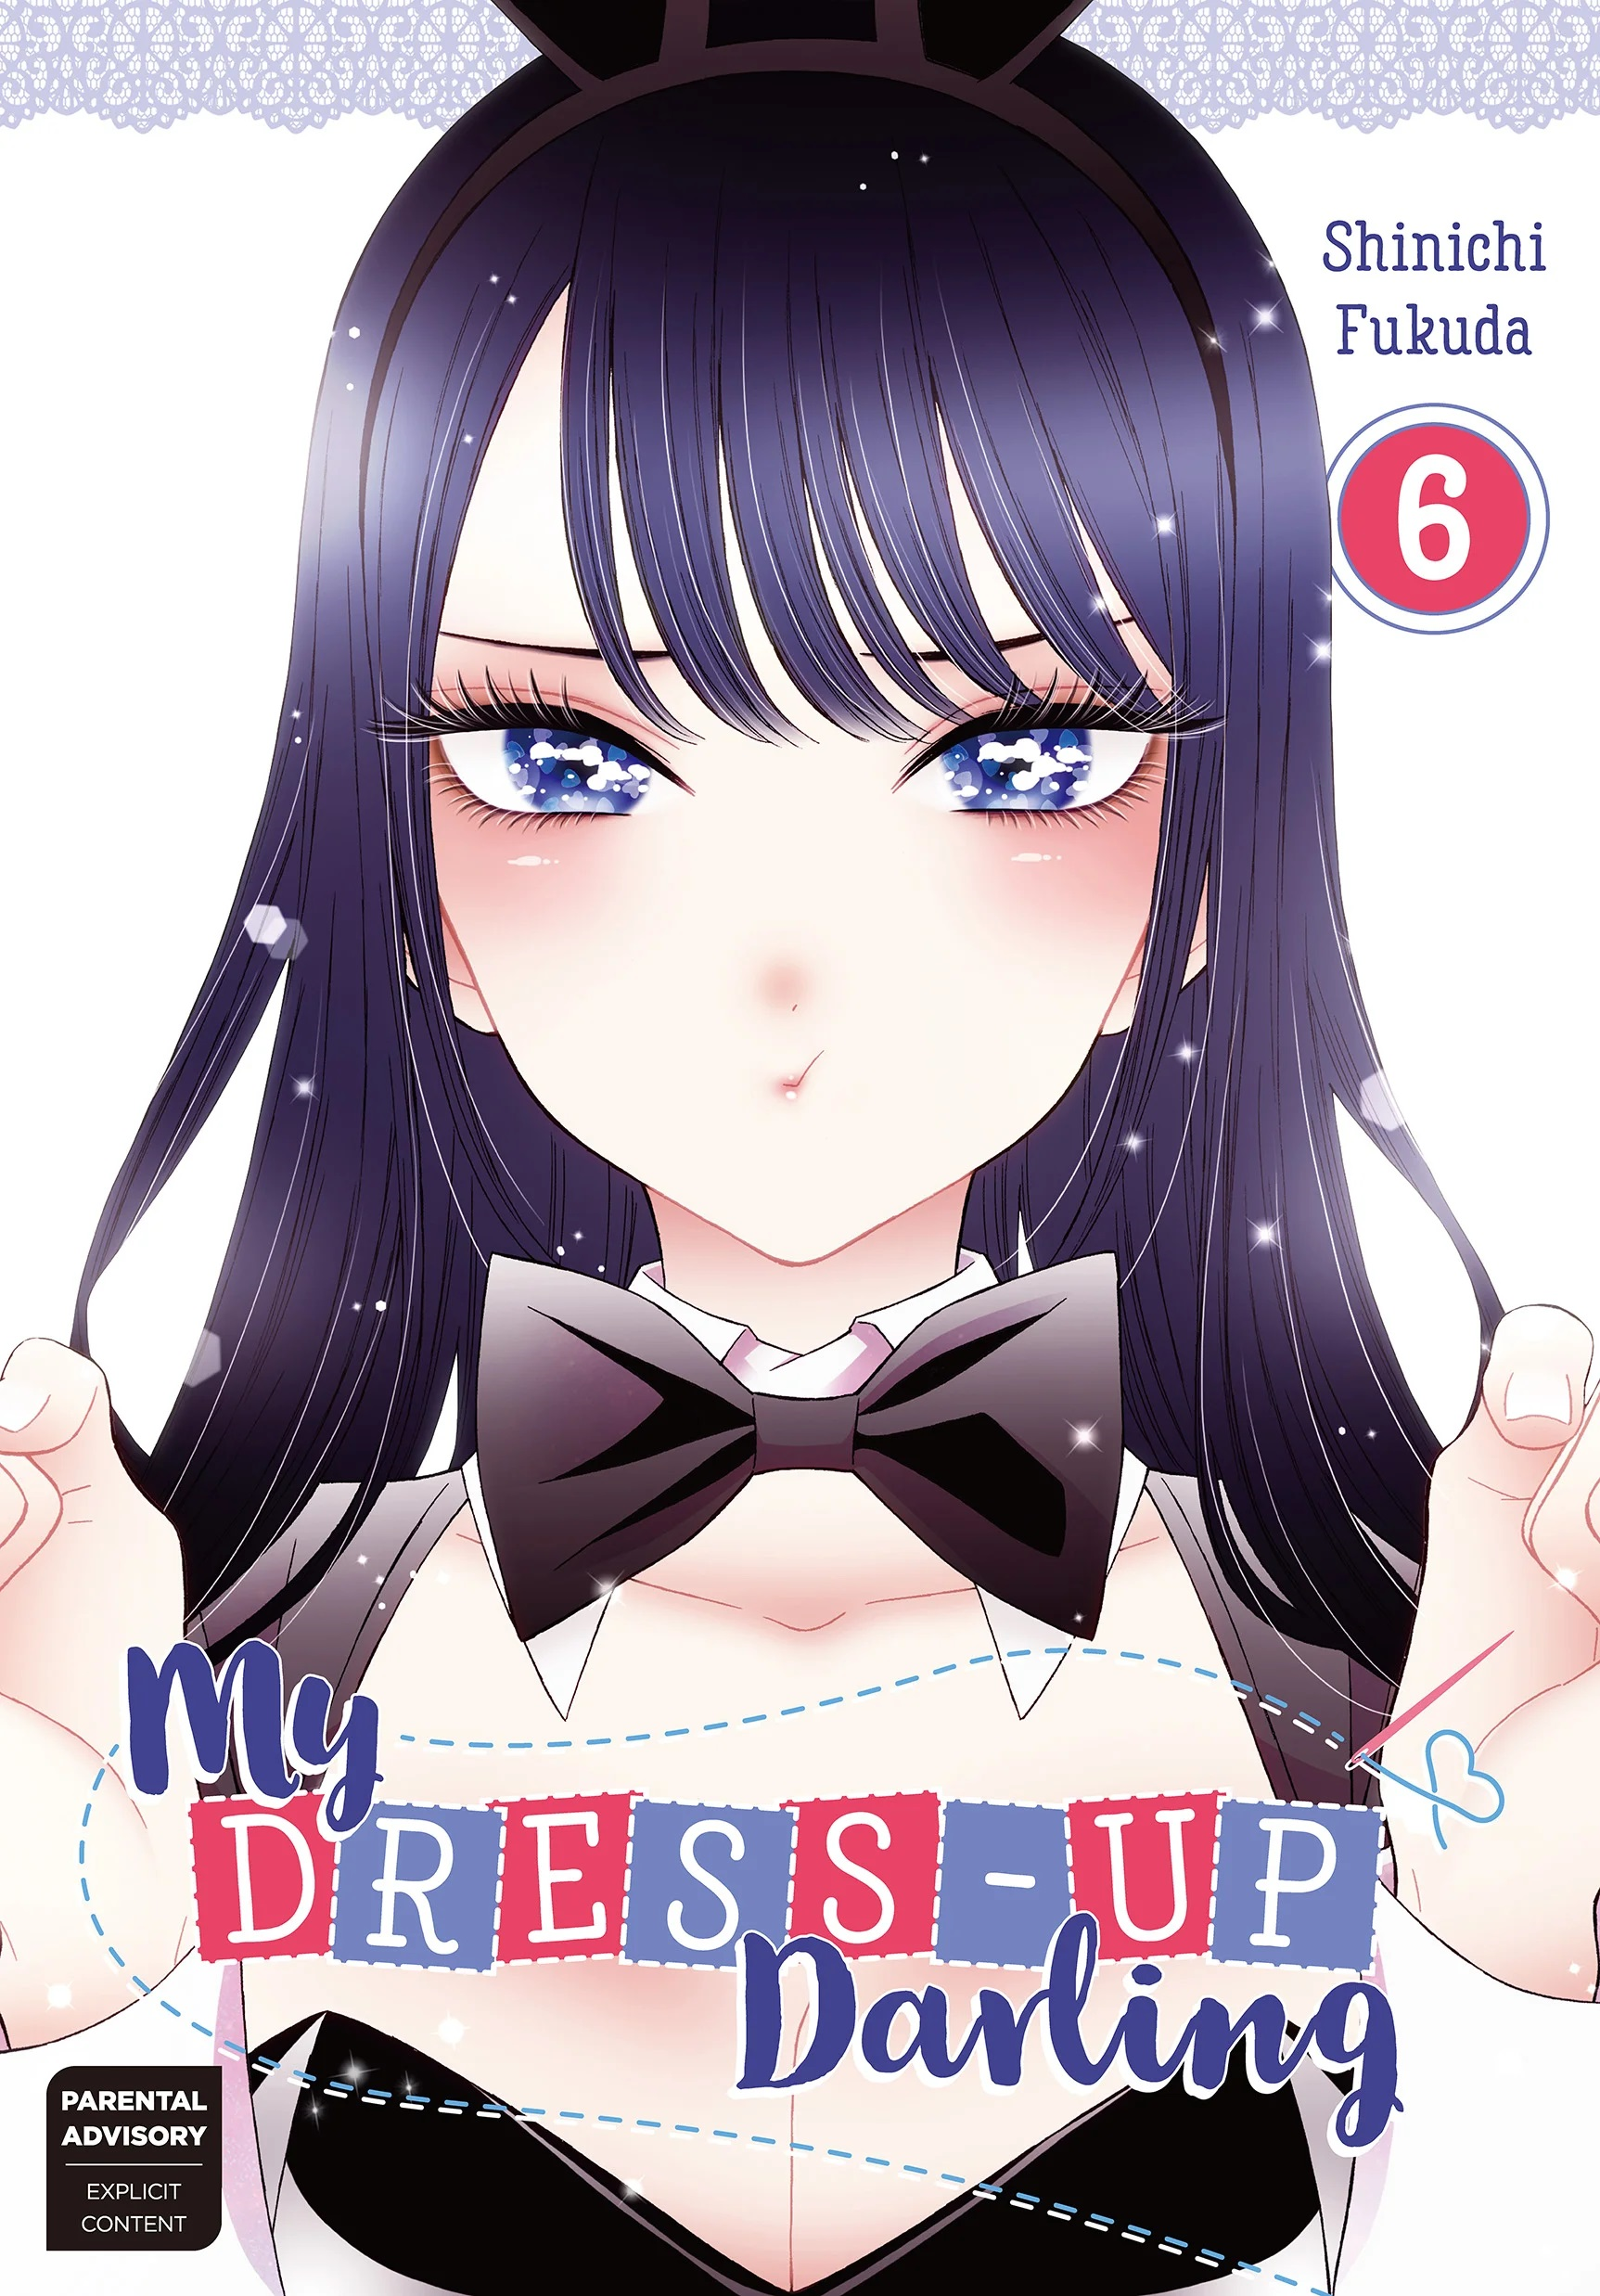 My dress up darling. Bisque doll (Vol. 10)